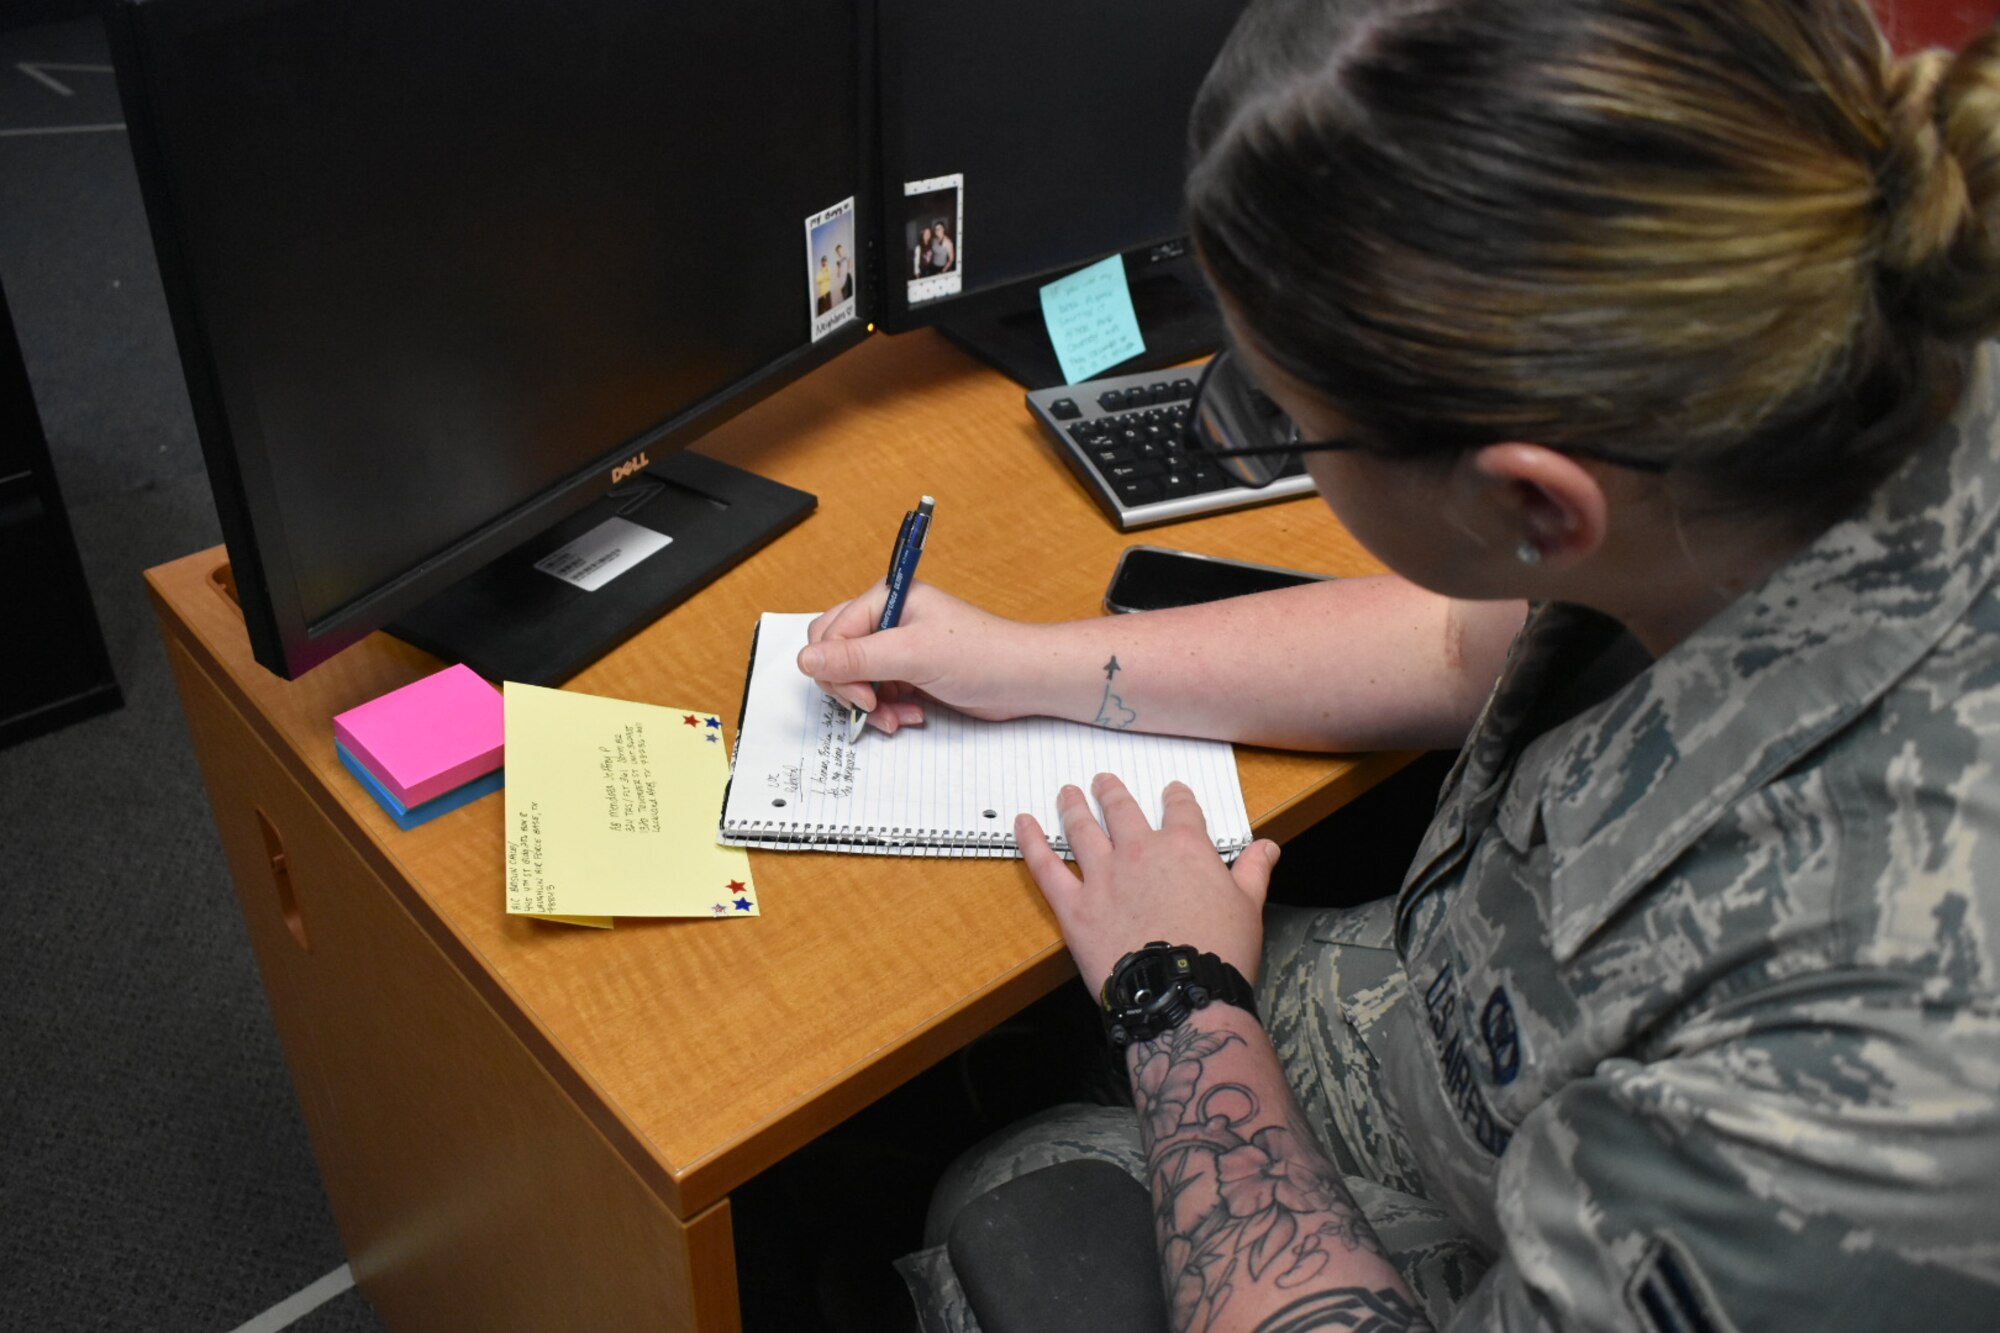 Airman 1st Class Cailey Brislin, 434th Squadron Aviation Resource Management (SARM) at Laughlin Air Force Base, Texas, writes to Basic Military Training Airmen at Lackland Air Force Base to offer support and words of wisdom. Brislin began Letters to Lackland in April, and has since gathered more than 50 of her fellow Airmen from around the world to send mail to basic trainees. (U.S. Air Force photo by 2nd Lt. Rachael Parks)